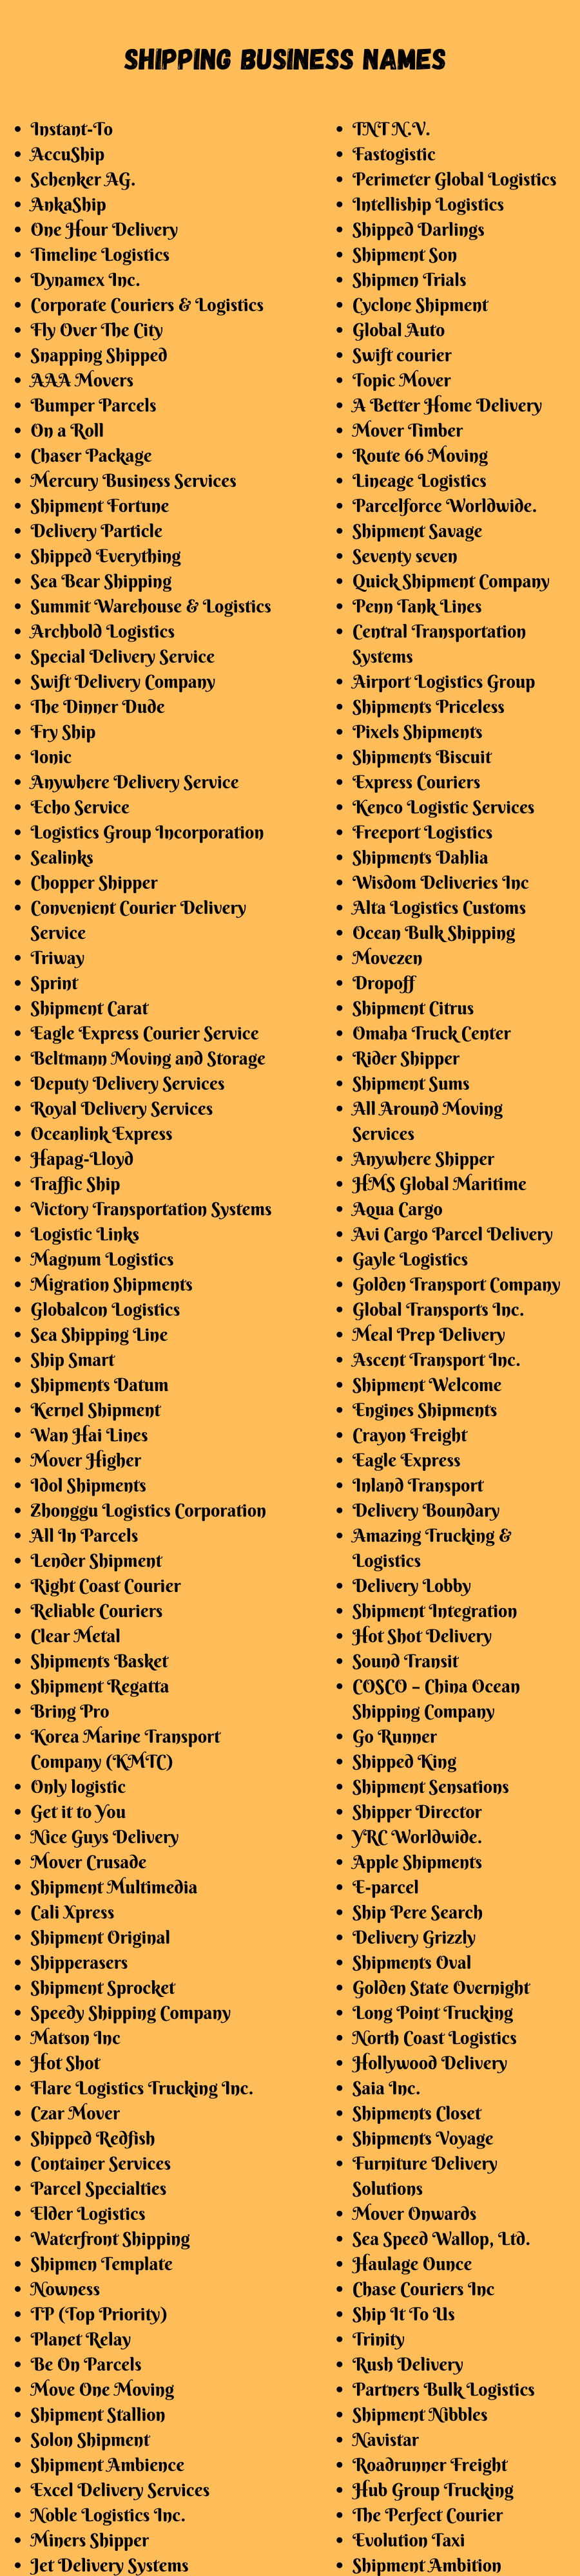 Shipping Business Names